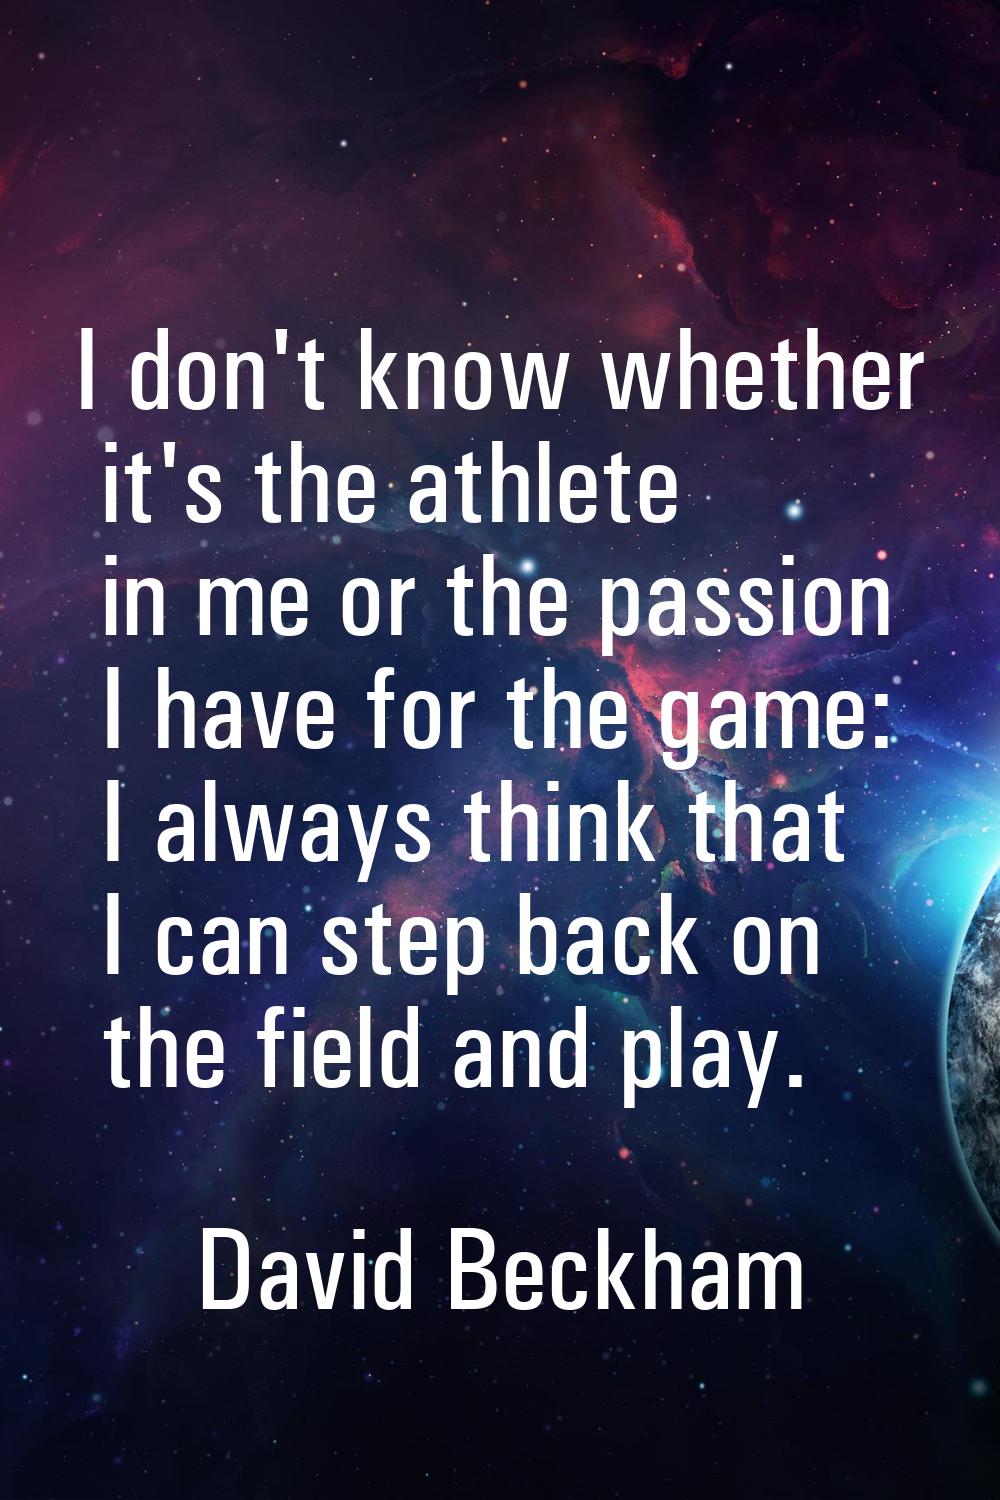 I don't know whether it's the athlete in me or the passion I have for the game: I always think that